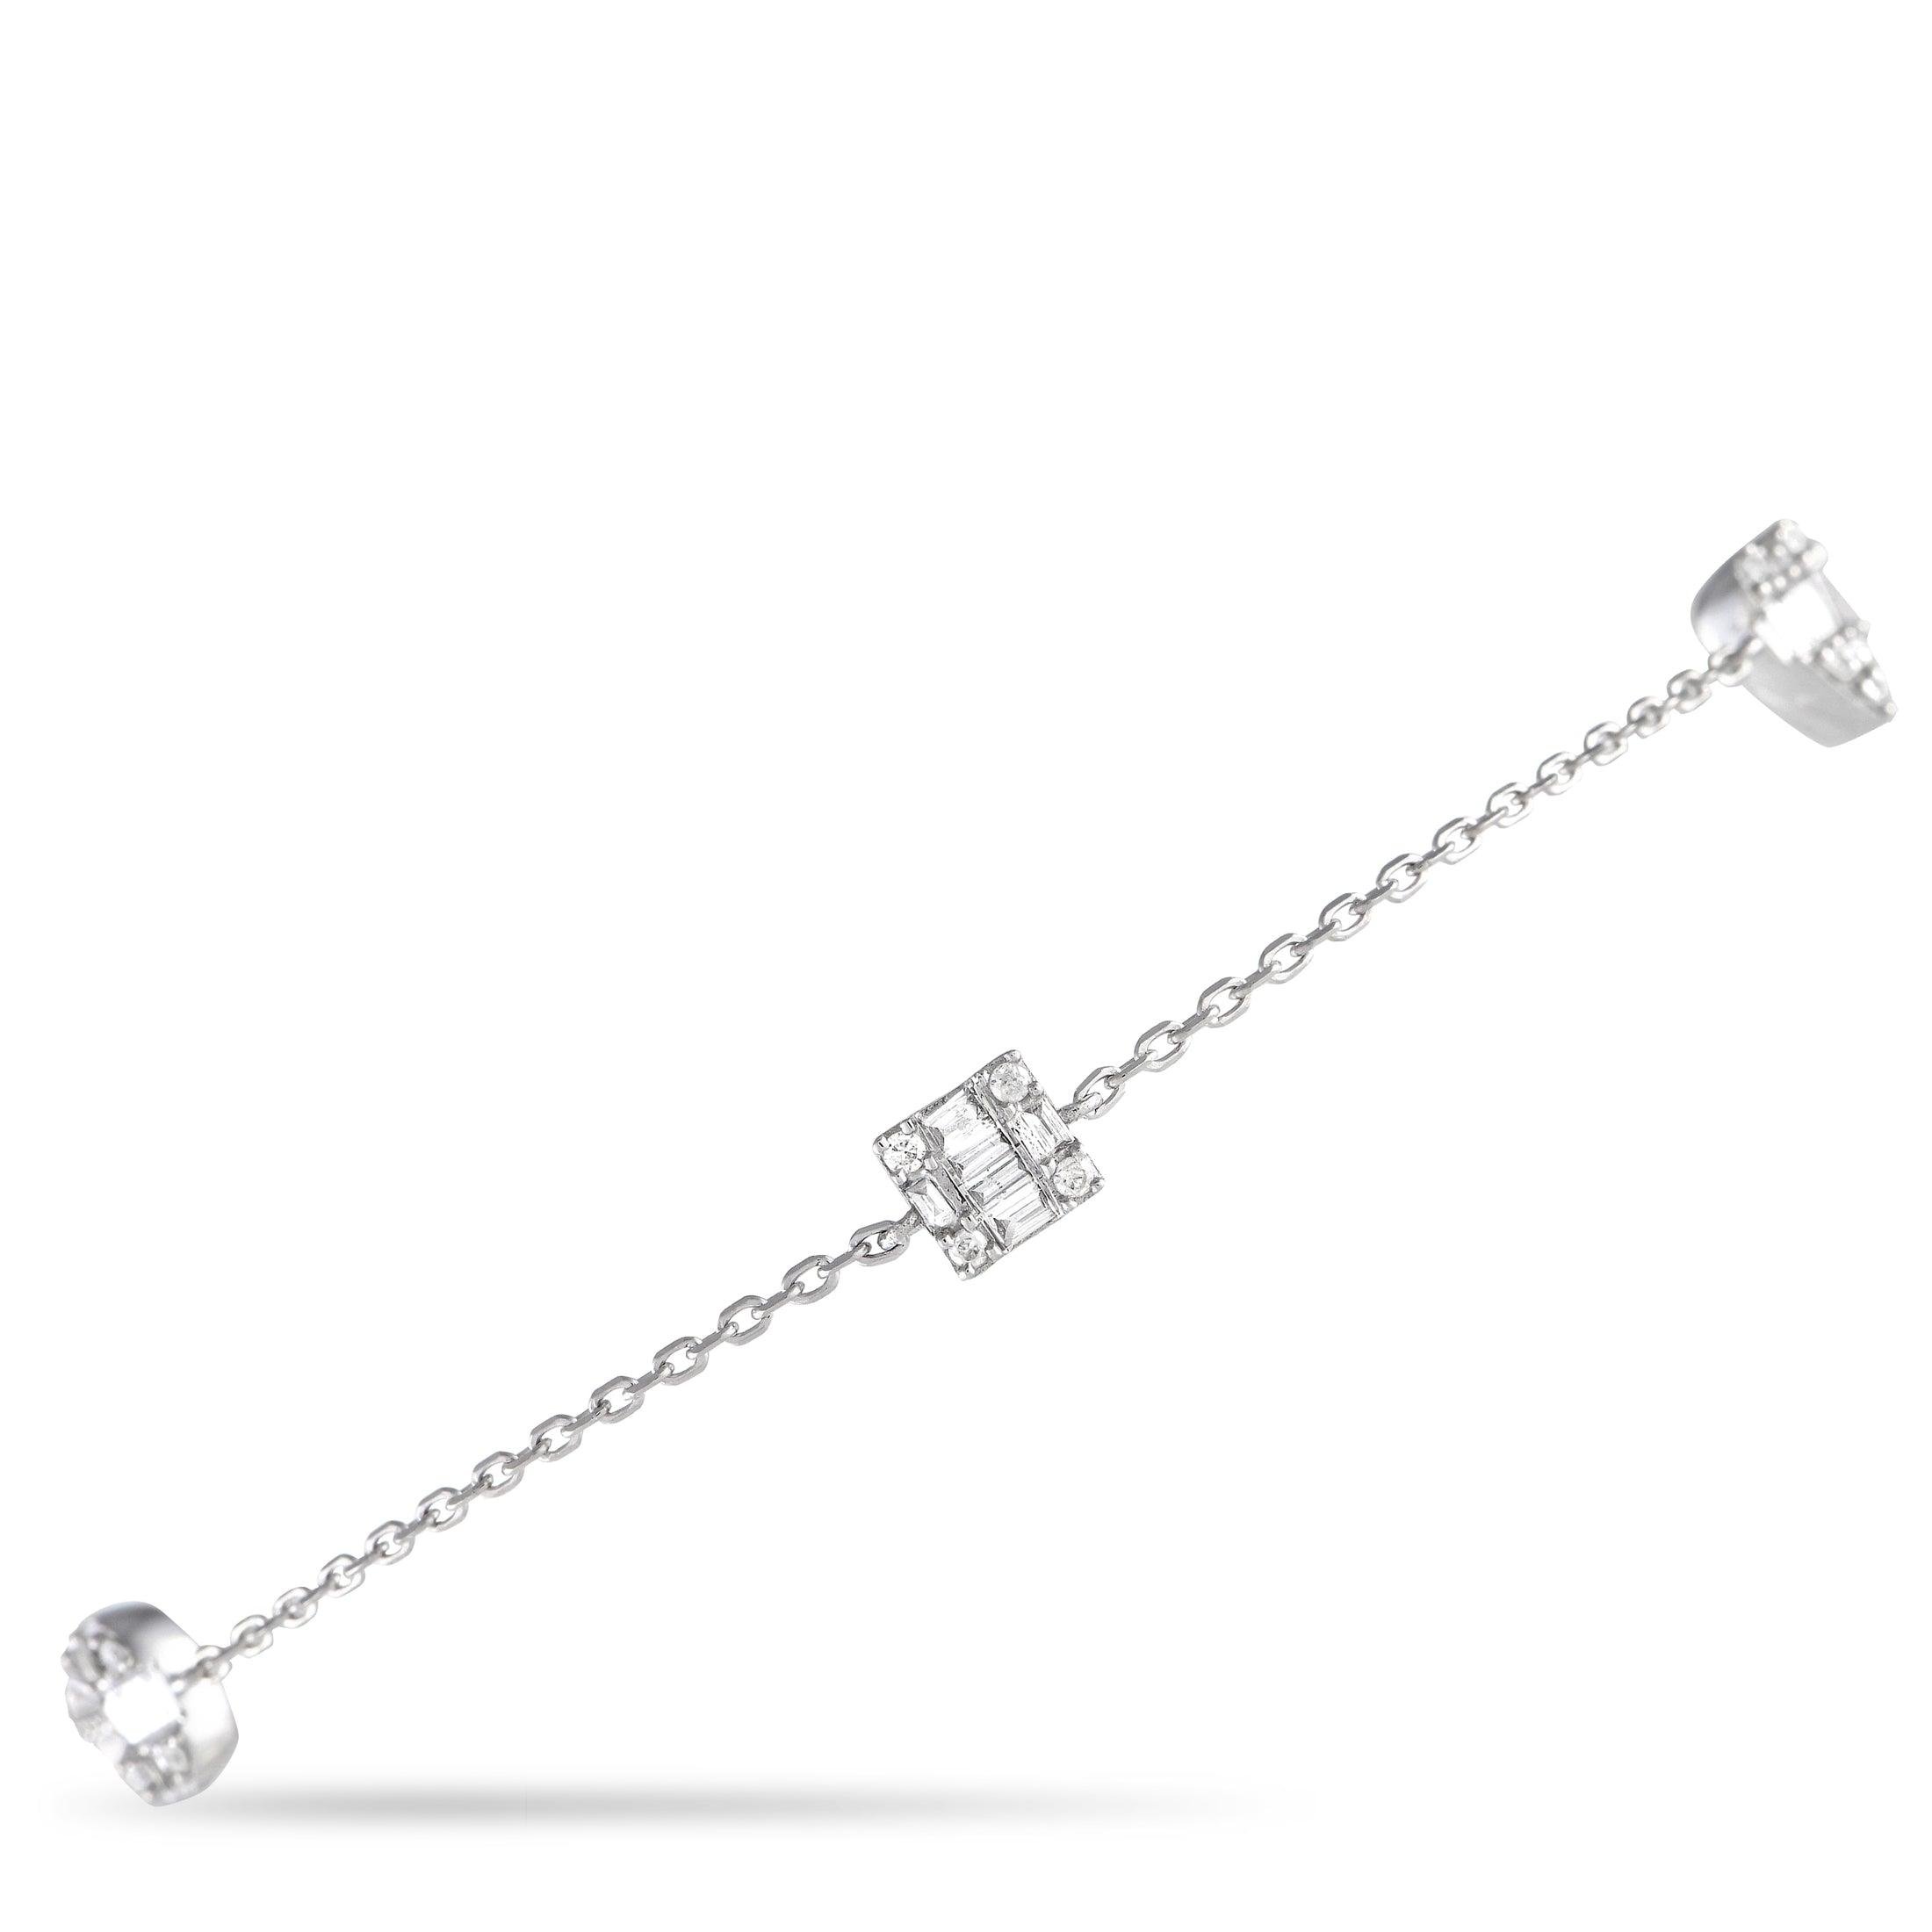 LB Exclusive 14K White Gold 0.28ct Diamond Station Bracelet BR09828-W by NON BRANDED